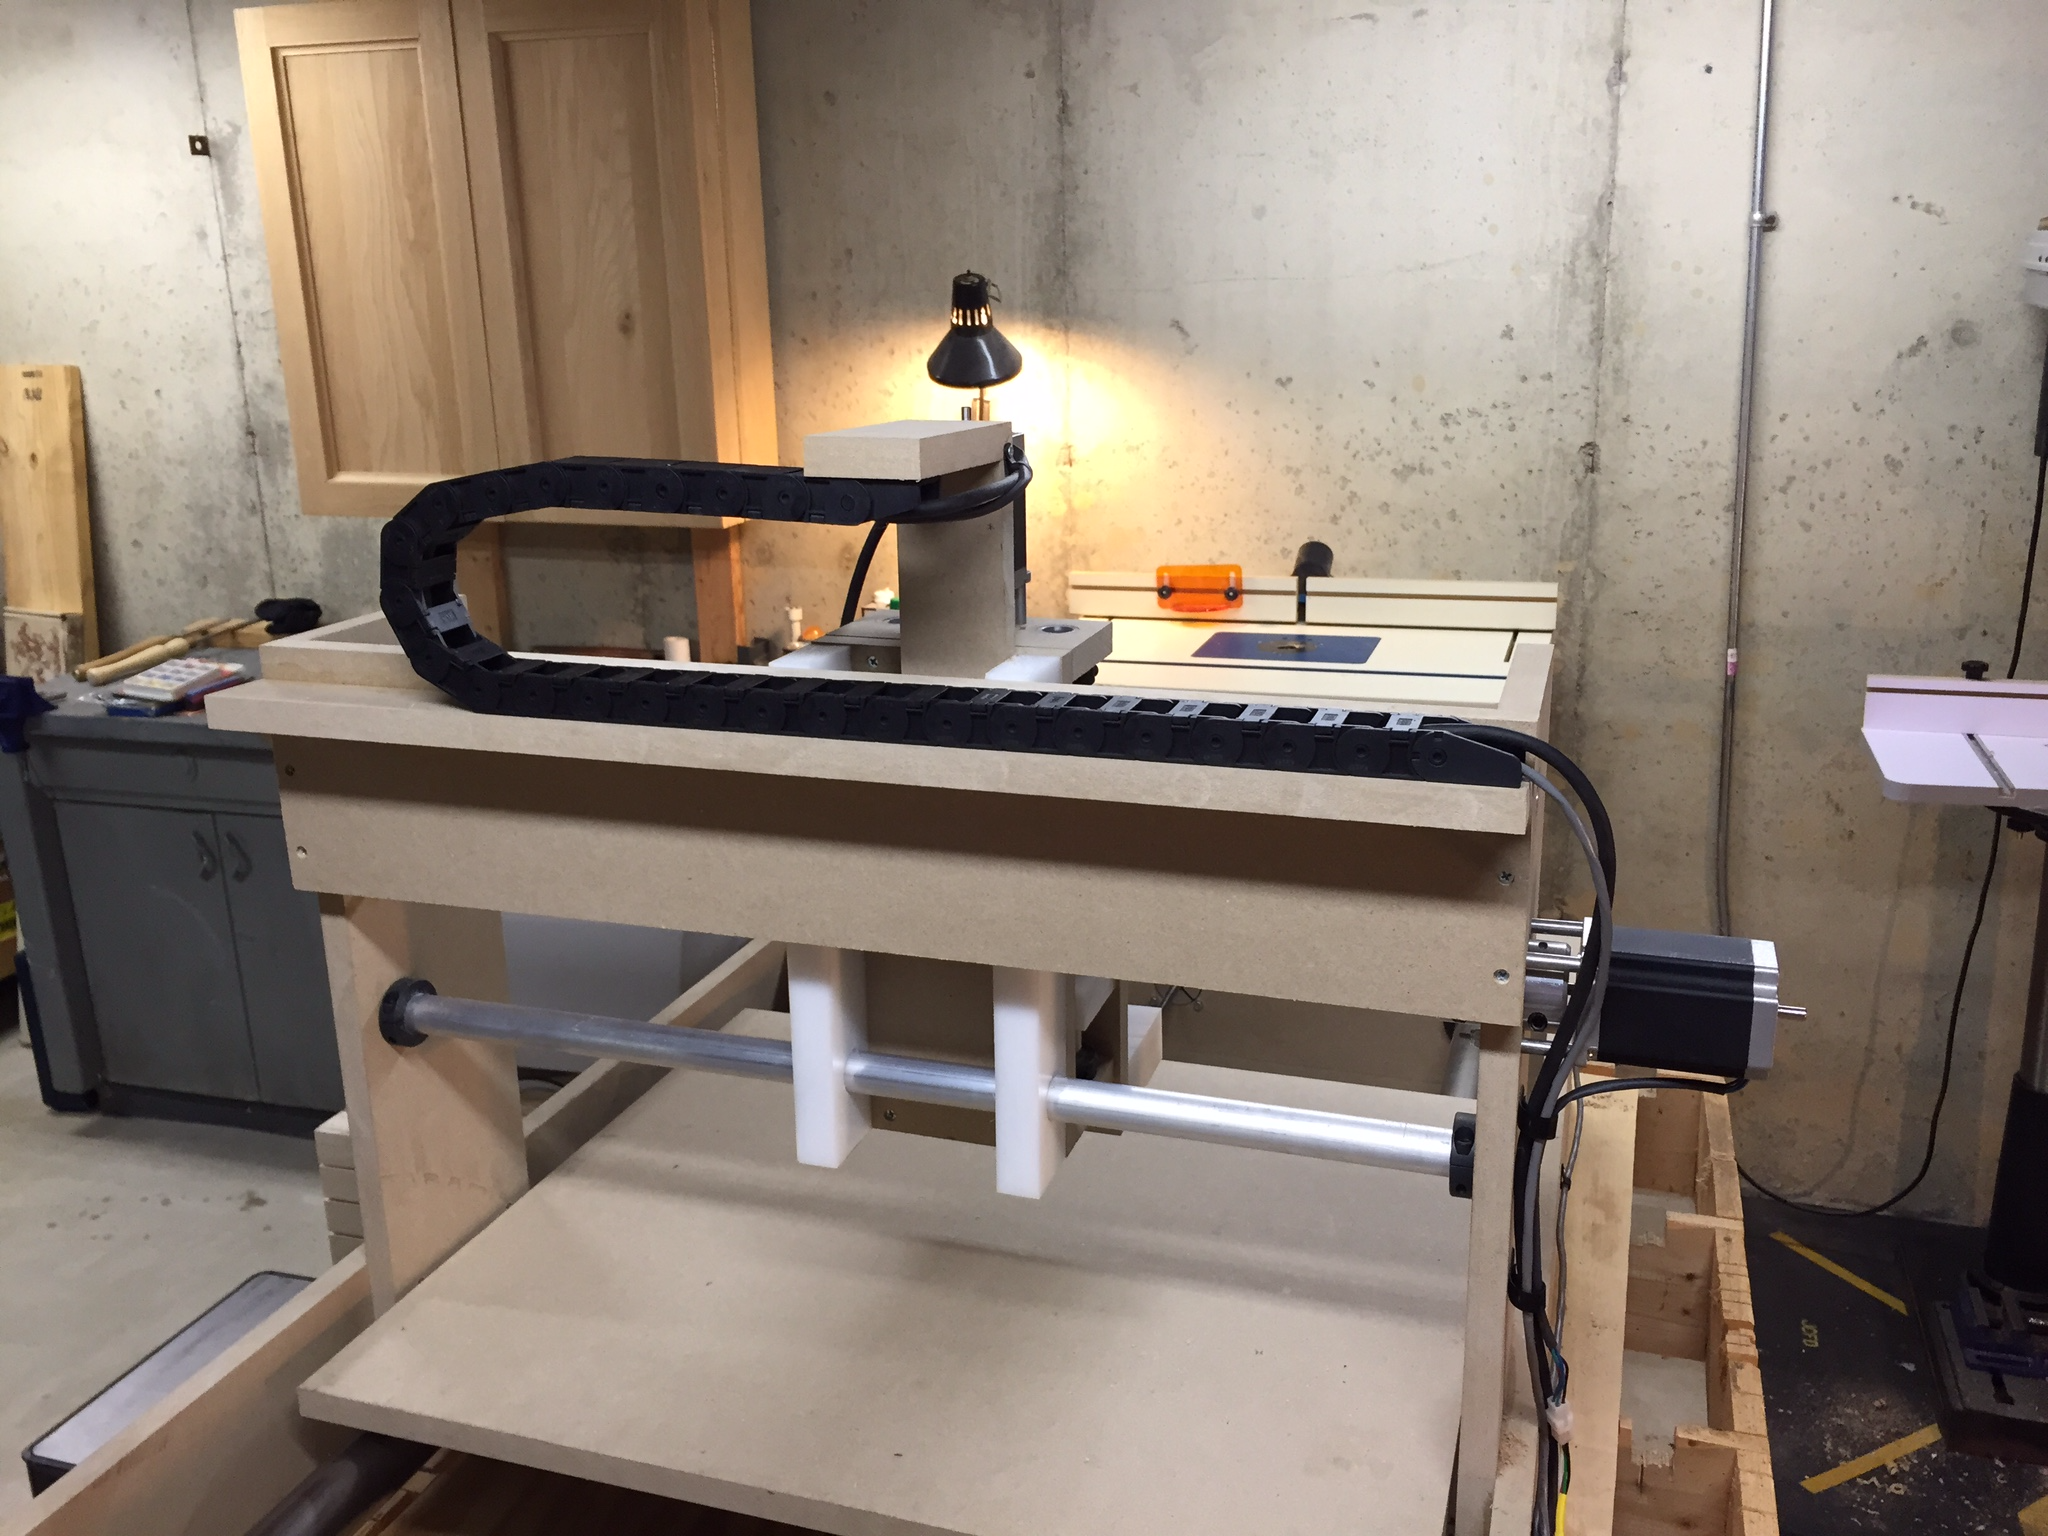 Build a CNC Router is Back at Popular Woodworking U